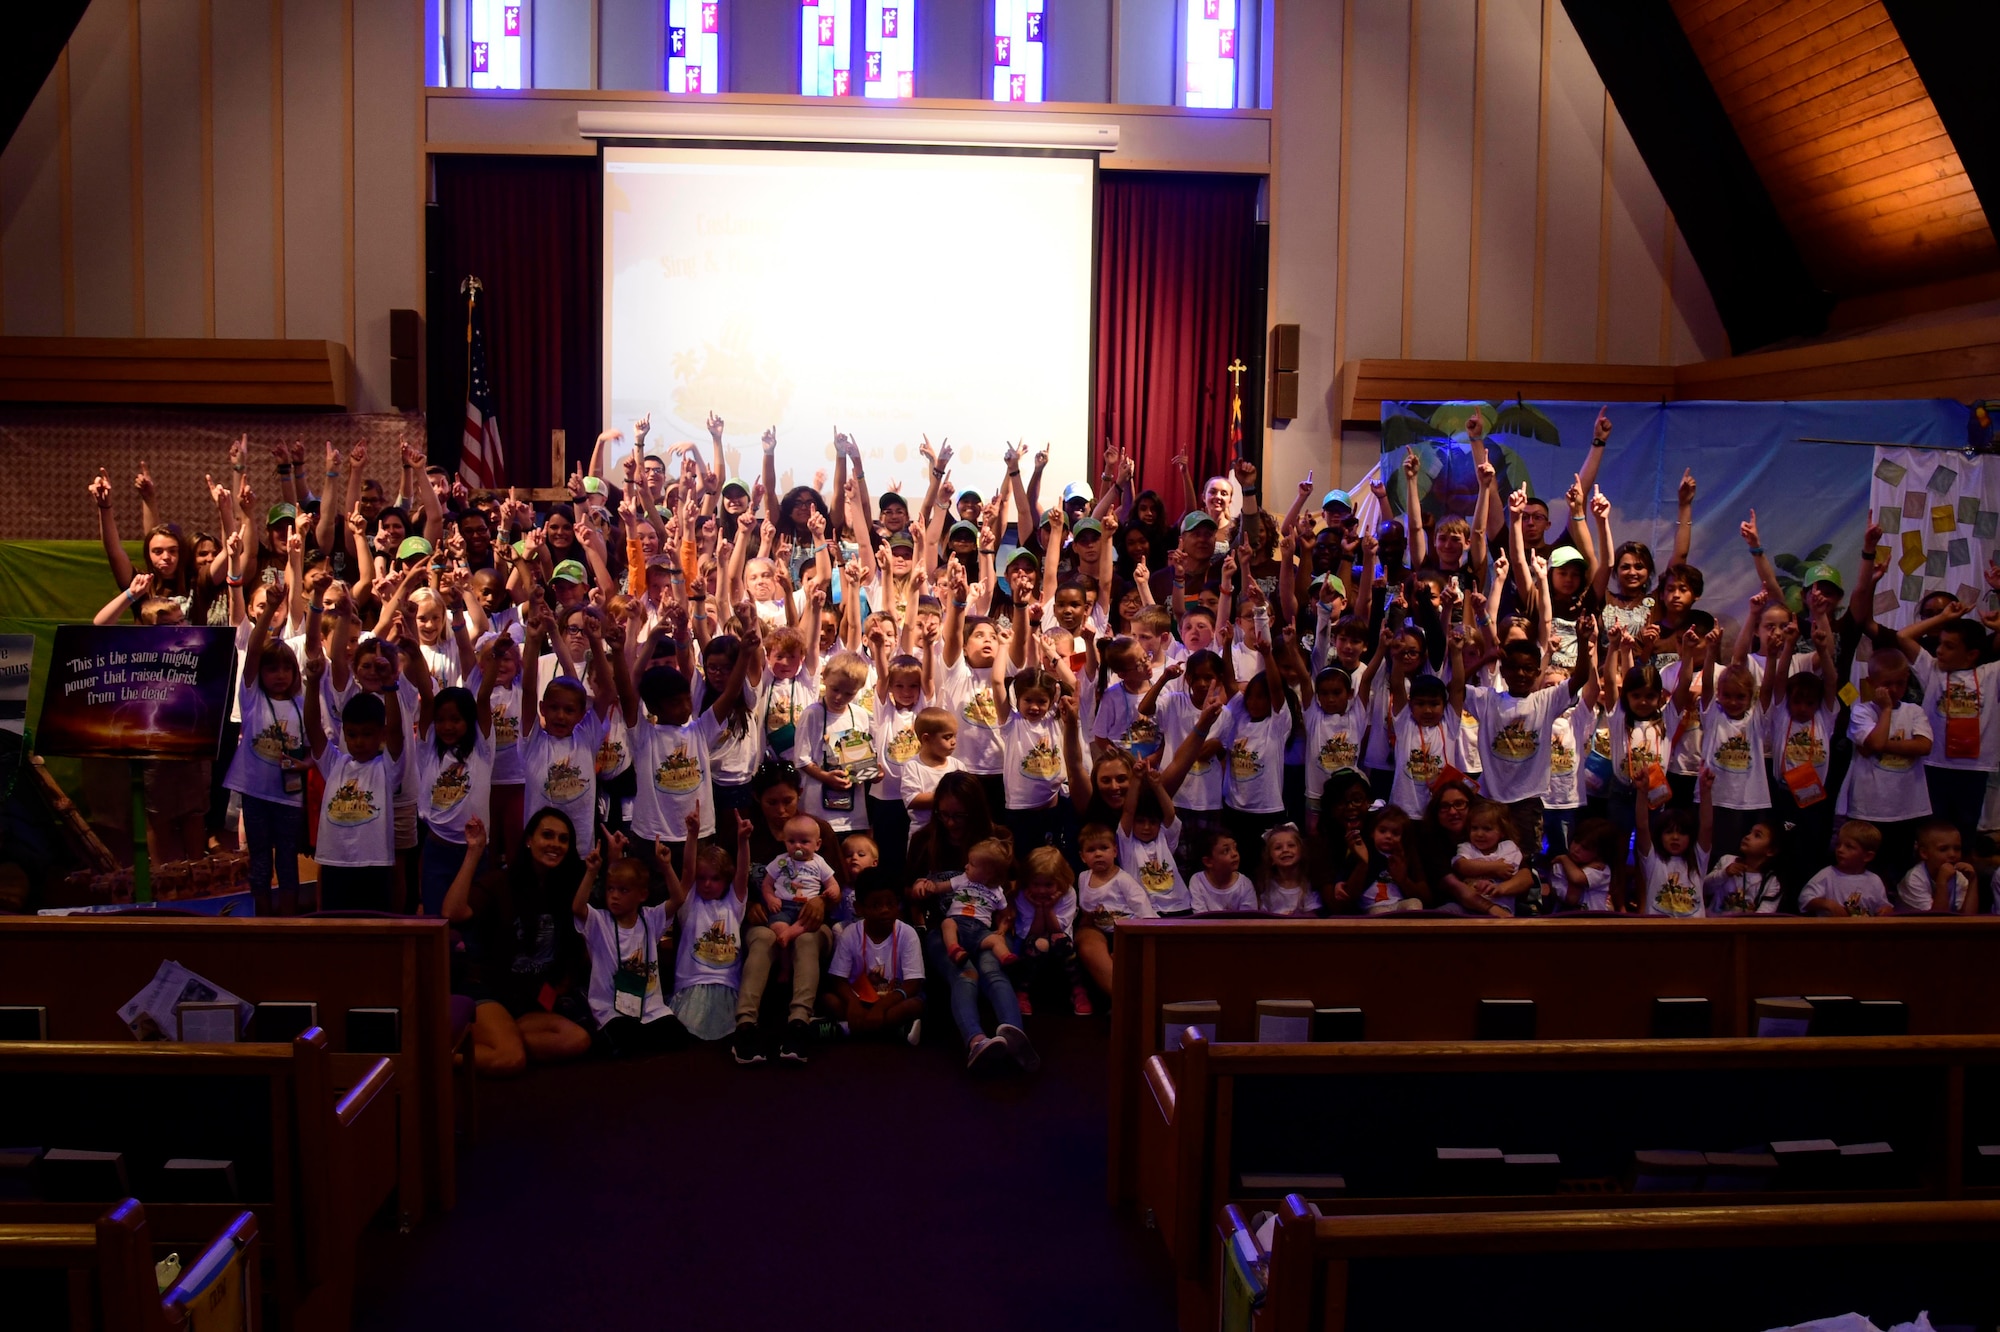 Vacation Bible School children and volunteers pose for a group photo June 29, 2018 at Fairchild Air Force Base, Washington. With focus on Christian-based beliefs, children spend this five-day youth program in various stations learning different lessons that fit snuggly into the overarching message of “Rescued by Jesus,” ultimately building resiliency through religion. (U.S. Air Force photo/Staff Sgt. Nick Daniello)